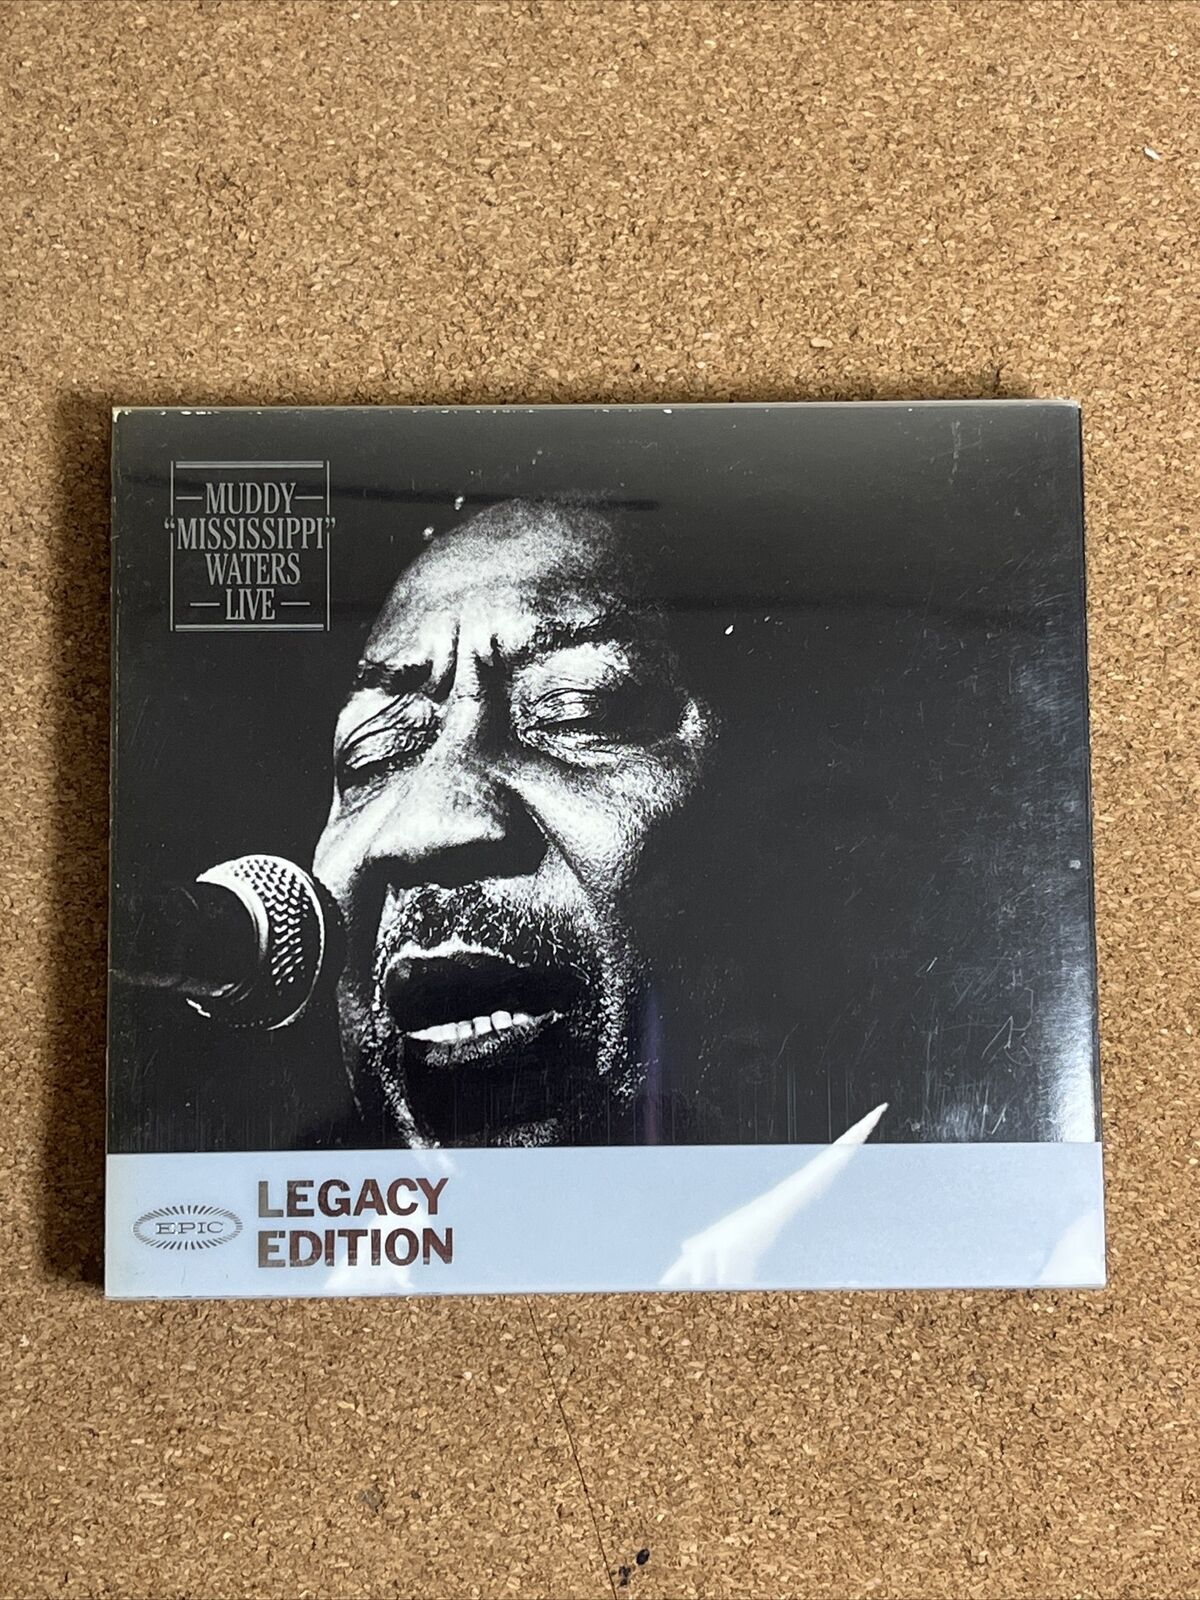 Muddy Mississippi Waters Live 2CD Legacy Edition